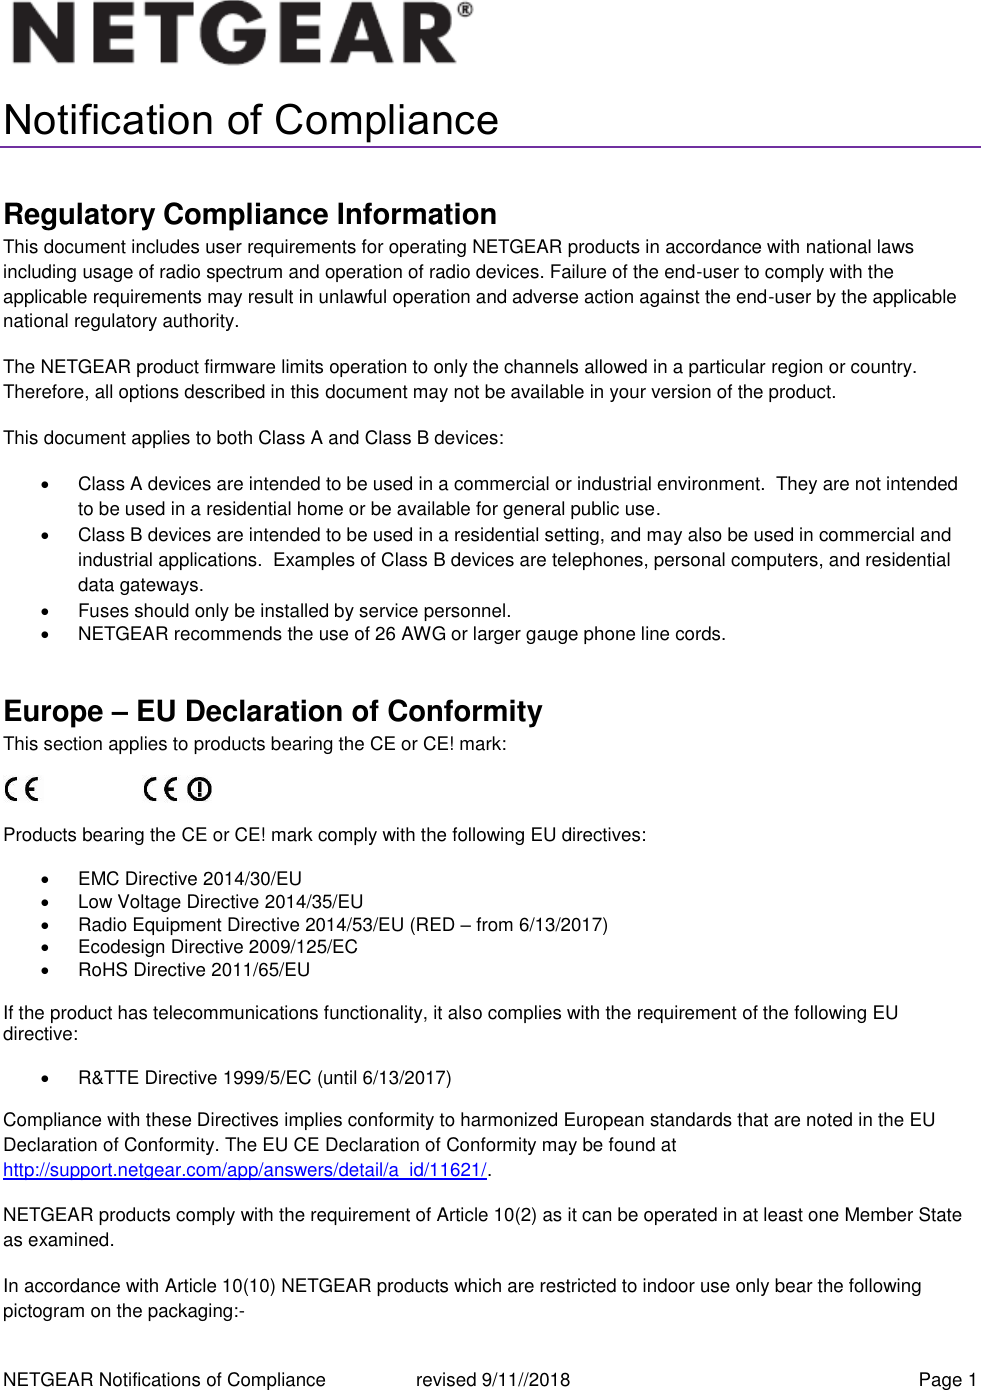 NETGEAR Notifications of Compliance    revised 9/11//2018  Page 1  Notification of Compliance Regulatory Compliance Information This document includes user requirements for operating NETGEAR products in accordance with national laws including usage of radio spectrum and operation of radio devices. Failure of the end-user to comply with the applicable requirements may result in unlawful operation and adverse action against the end-user by the applicable national regulatory authority. The NETGEAR product firmware limits operation to only the channels allowed in a particular region or country. Therefore, all options described in this document may not be available in your version of the product. This document applies to both Class A and Class B devices:   Class A devices are intended to be used in a commercial or industrial environment.  They are not intended to be used in a residential home or be available for general public use.   Class B devices are intended to be used in a residential setting, and may also be used in commercial and industrial applications.  Examples of Class B devices are telephones, personal computers, and residential data gateways.   Fuses should only be installed by service personnel.   NETGEAR recommends the use of 26 AWG or larger gauge phone line cords. Europe – EU Declaration of Conformity This section applies to products bearing the CE or CE! mark:                      Products bearing the CE or CE! mark comply with the following EU directives:   EMC Directive 2014/30/EU   Low Voltage Directive 2014/35/EU   Radio Equipment Directive 2014/53/EU (RED – from 6/13/2017)   Ecodesign Directive 2009/125/EC   RoHS Directive 2011/65/EU If the product has telecommunications functionality, it also complies with the requirement of the following EU directive:   R&amp;TTE Directive 1999/5/EC (until 6/13/2017) Compliance with these Directives implies conformity to harmonized European standards that are noted in the EU Declaration of Conformity. The EU CE Declaration of Conformity may be found at http://support.netgear.com/app/answers/detail/a_id/11621/. NETGEAR products comply with the requirement of Article 10(2) as it can be operated in at least one Member State as examined.  In accordance with Article 10(10) NETGEAR products which are restricted to indoor use only bear the following pictogram on the packaging:- 